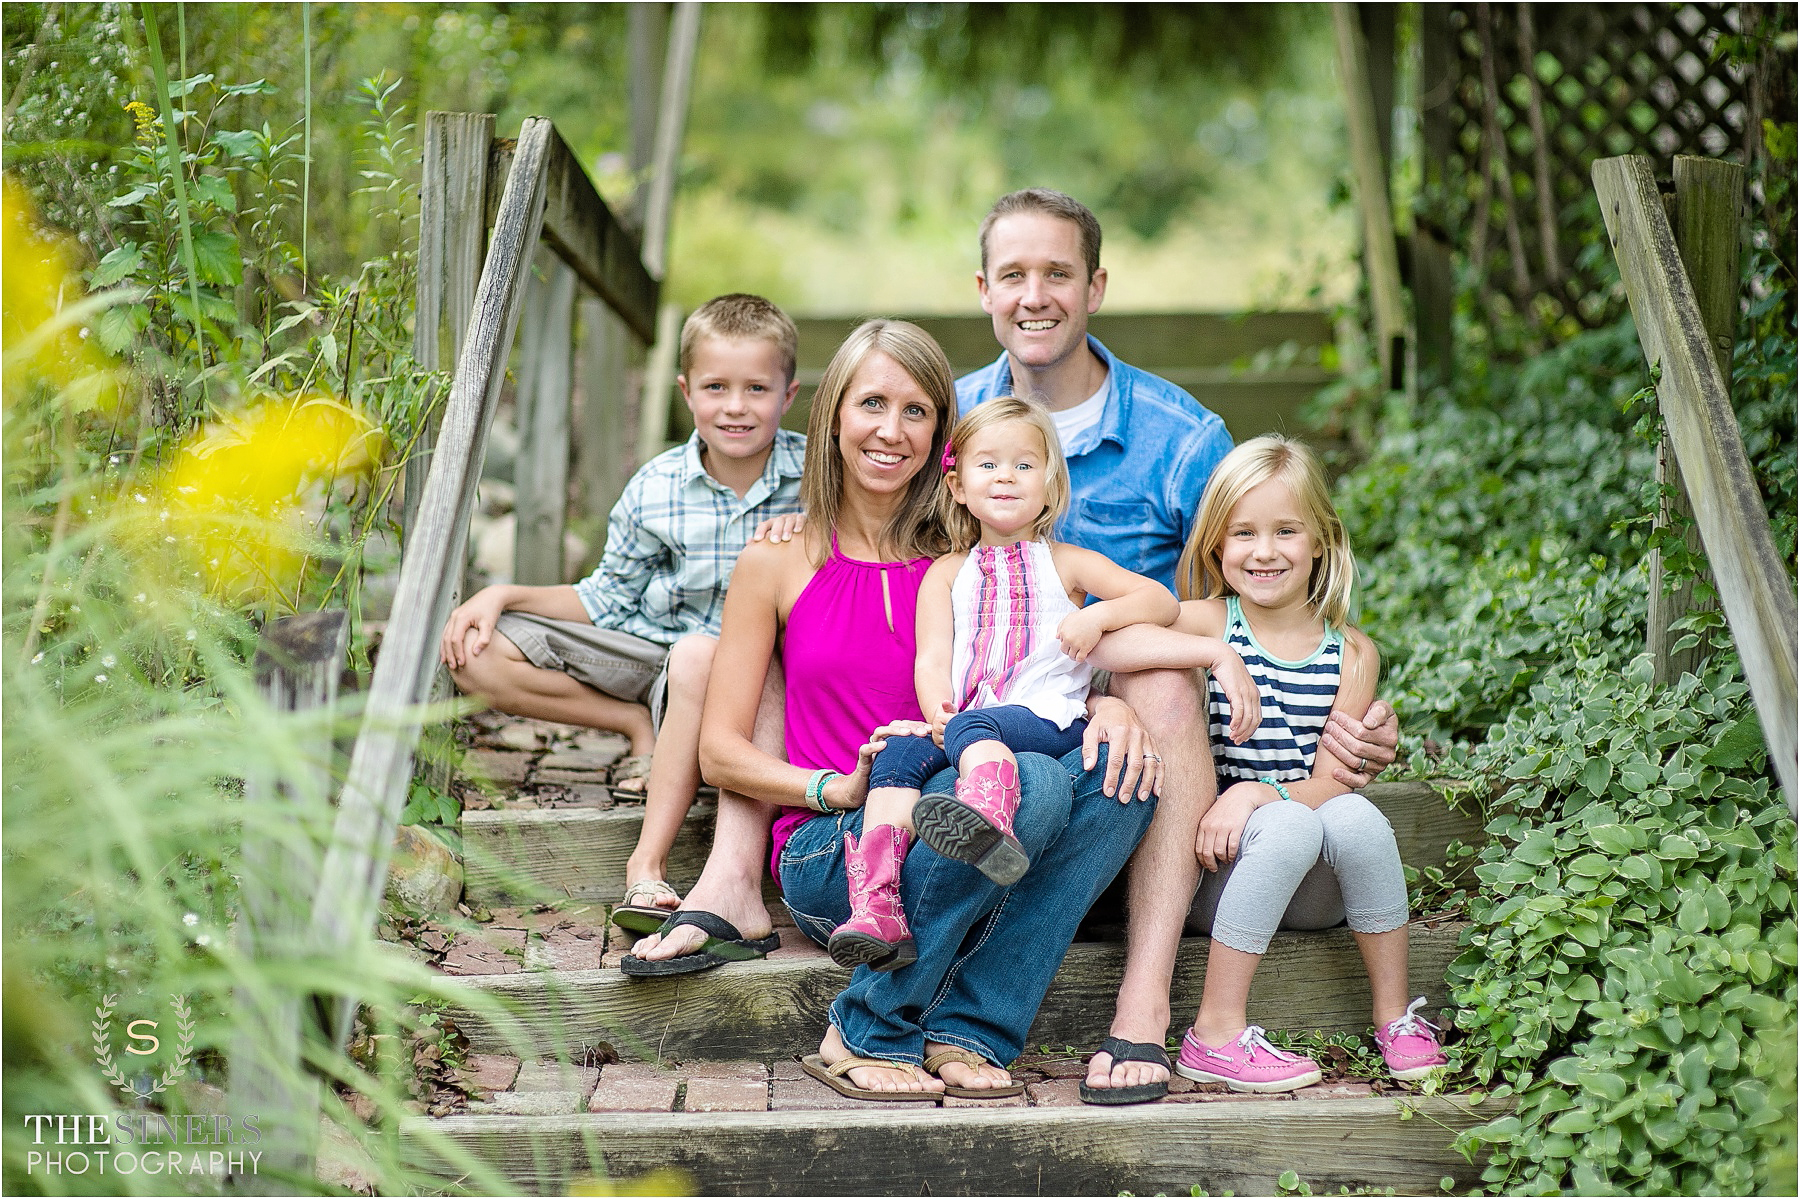 Okland Family Indianapolis Family Photography_TheSinersPhotography_0007